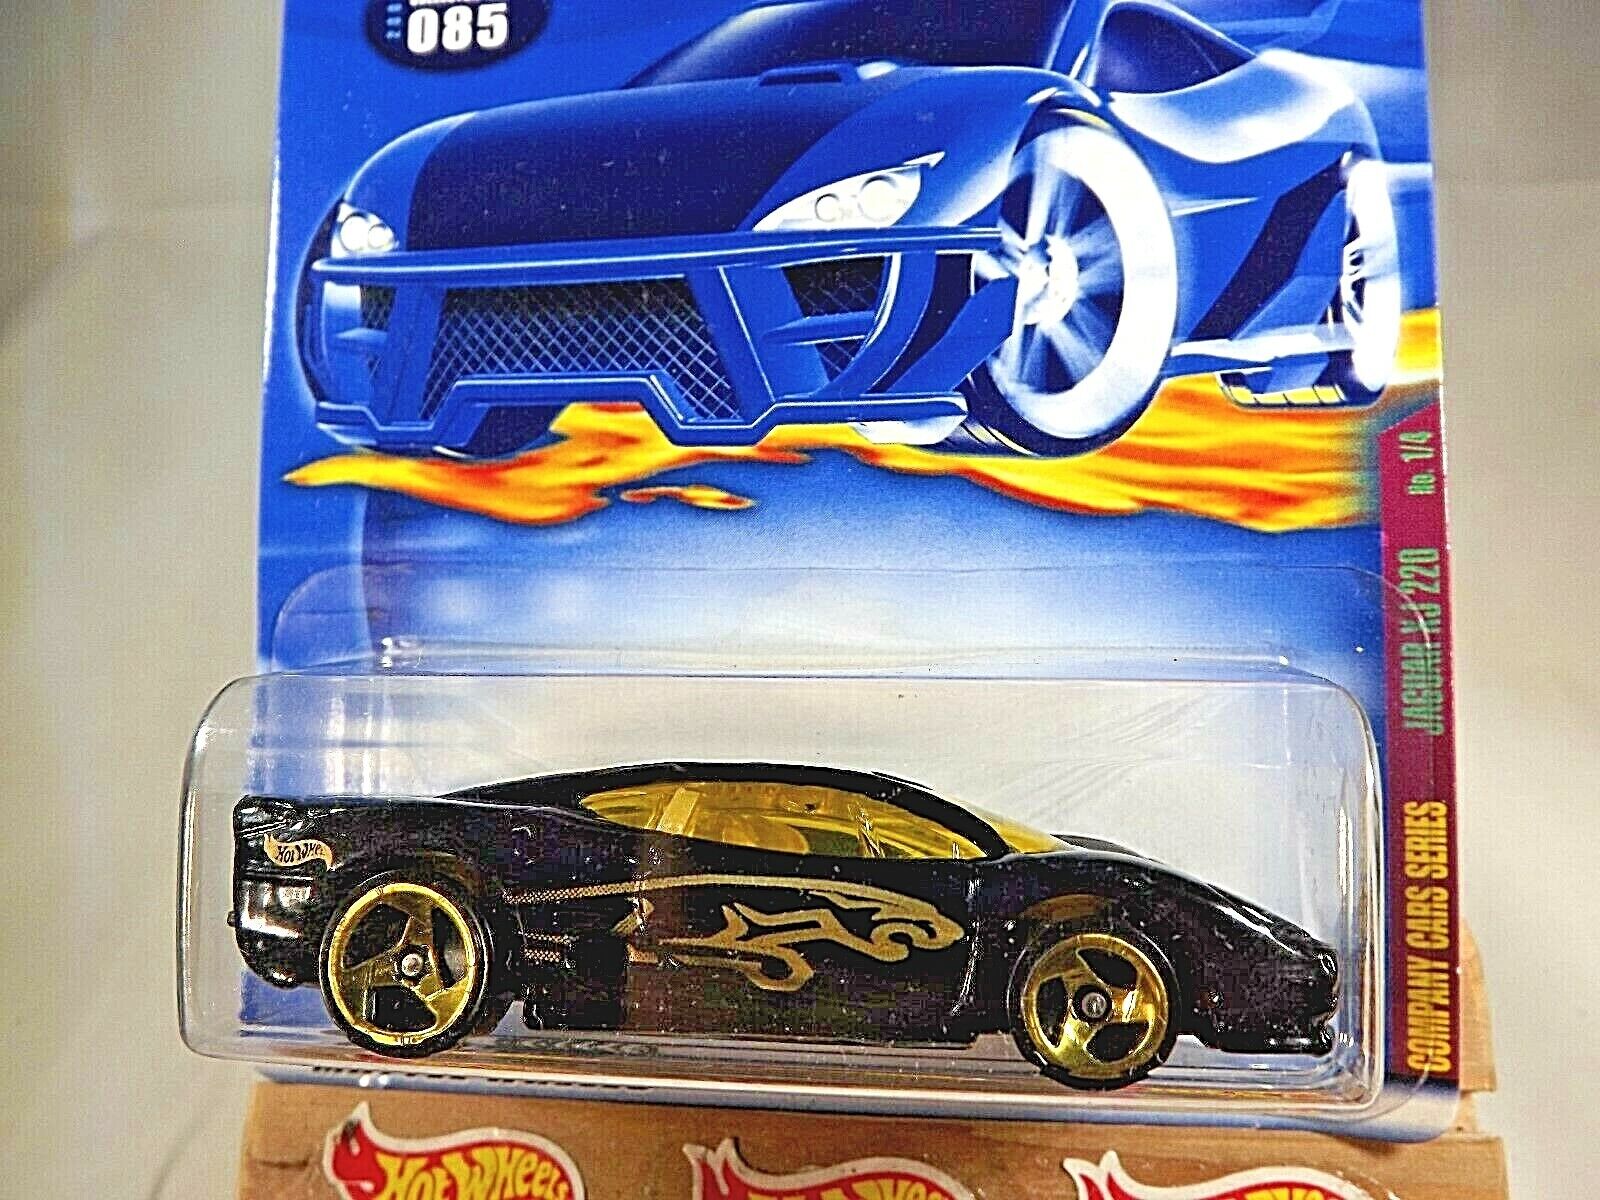 2001 Hot Wheels COMPANY CARS SERIES Complete Set of 4 #85,86,87,88   See Details Hot Wheels 50123-0910 - фотография #3